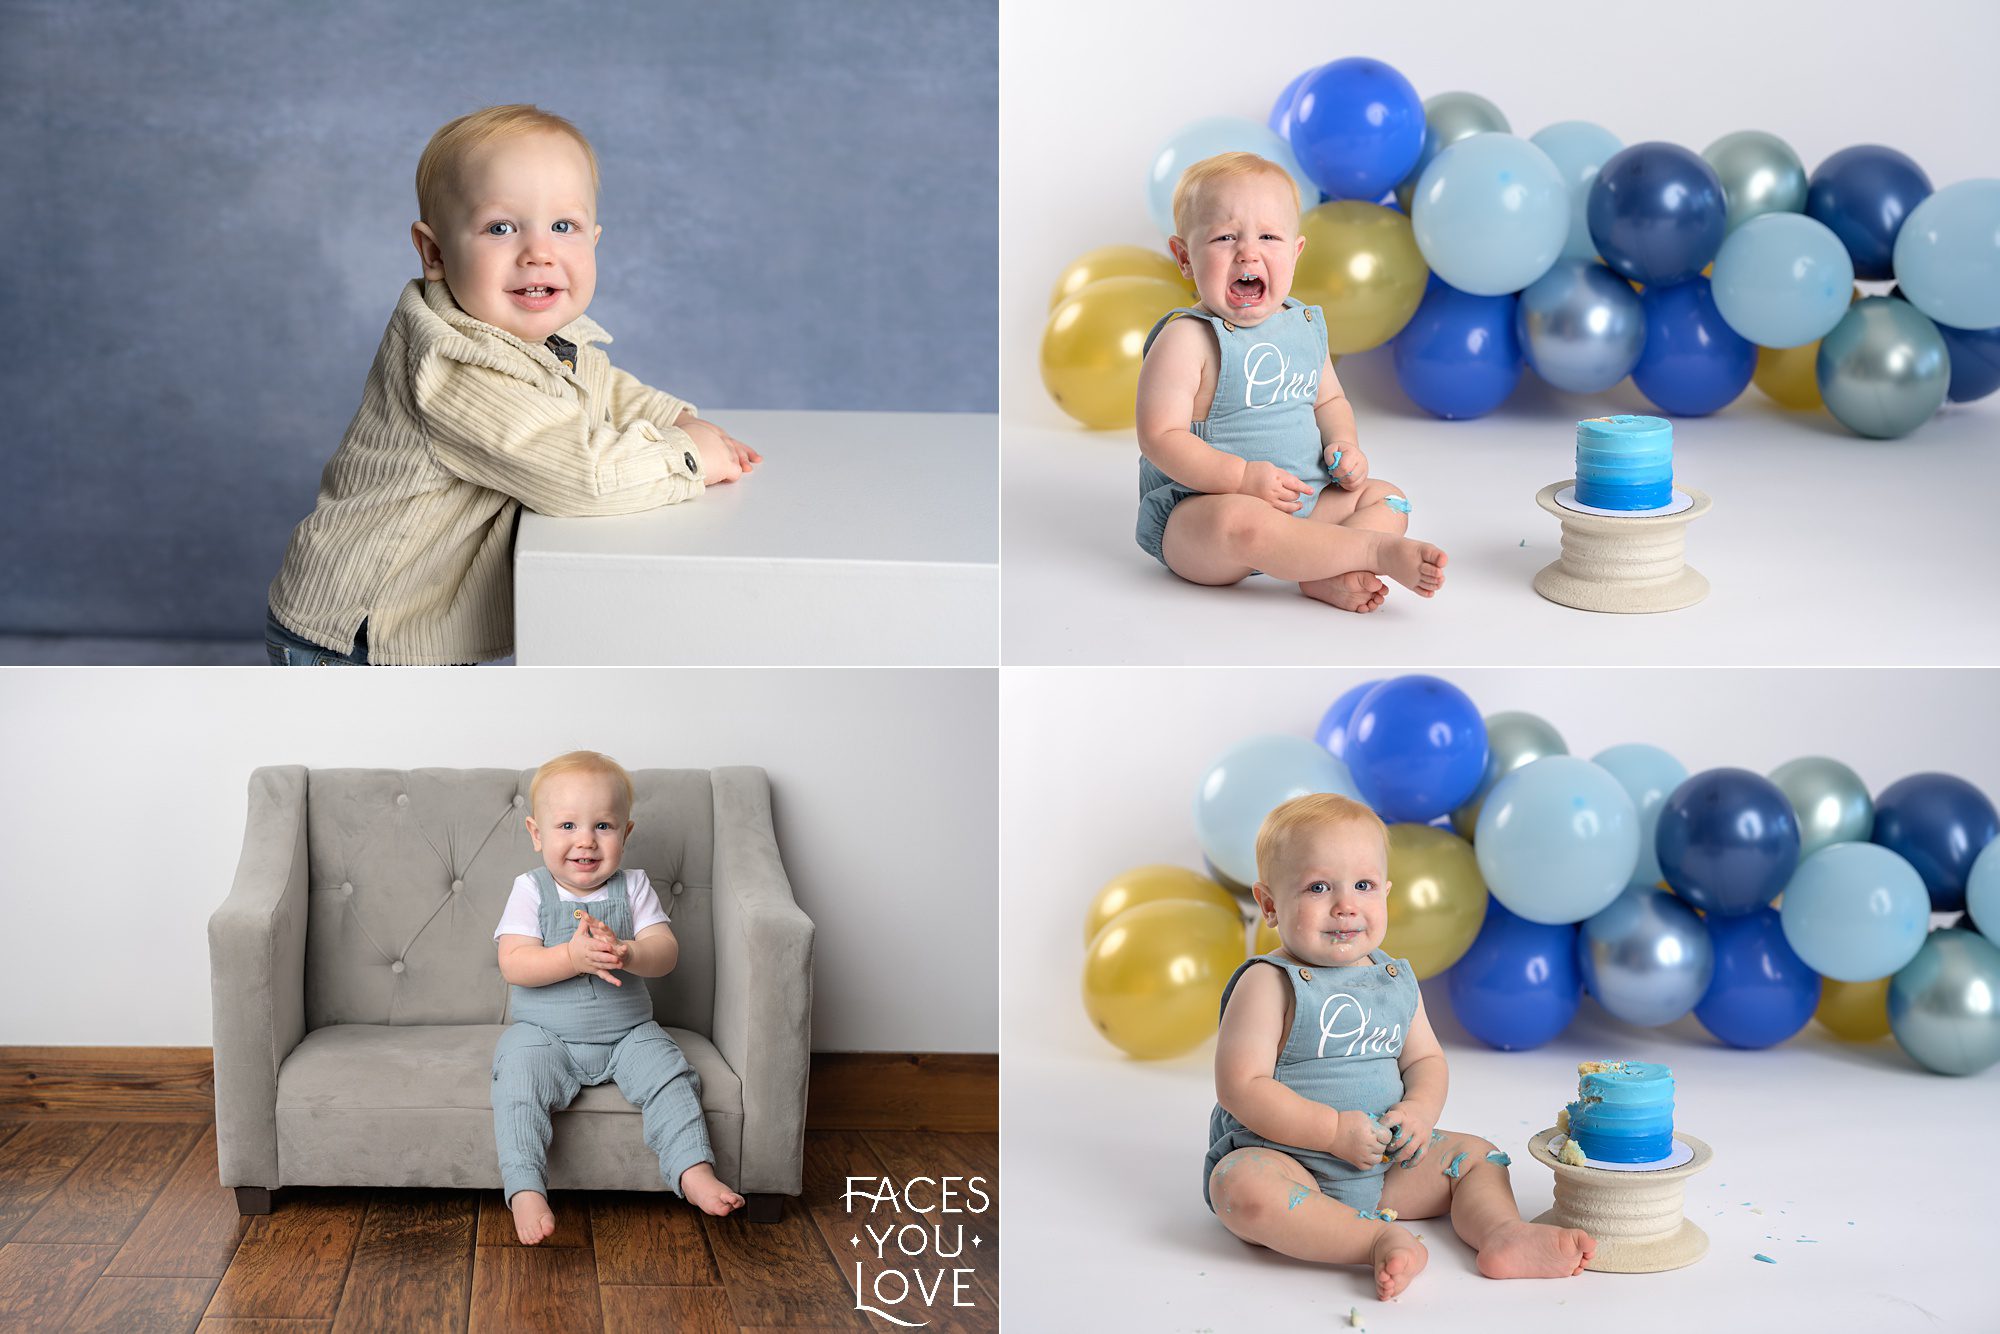 One year baby session, photographed on light grey and blue backgrounds. Baby is wearing blue and beige, with a blue onesie. Photographed on-site at Faces You Love in Overland Park.